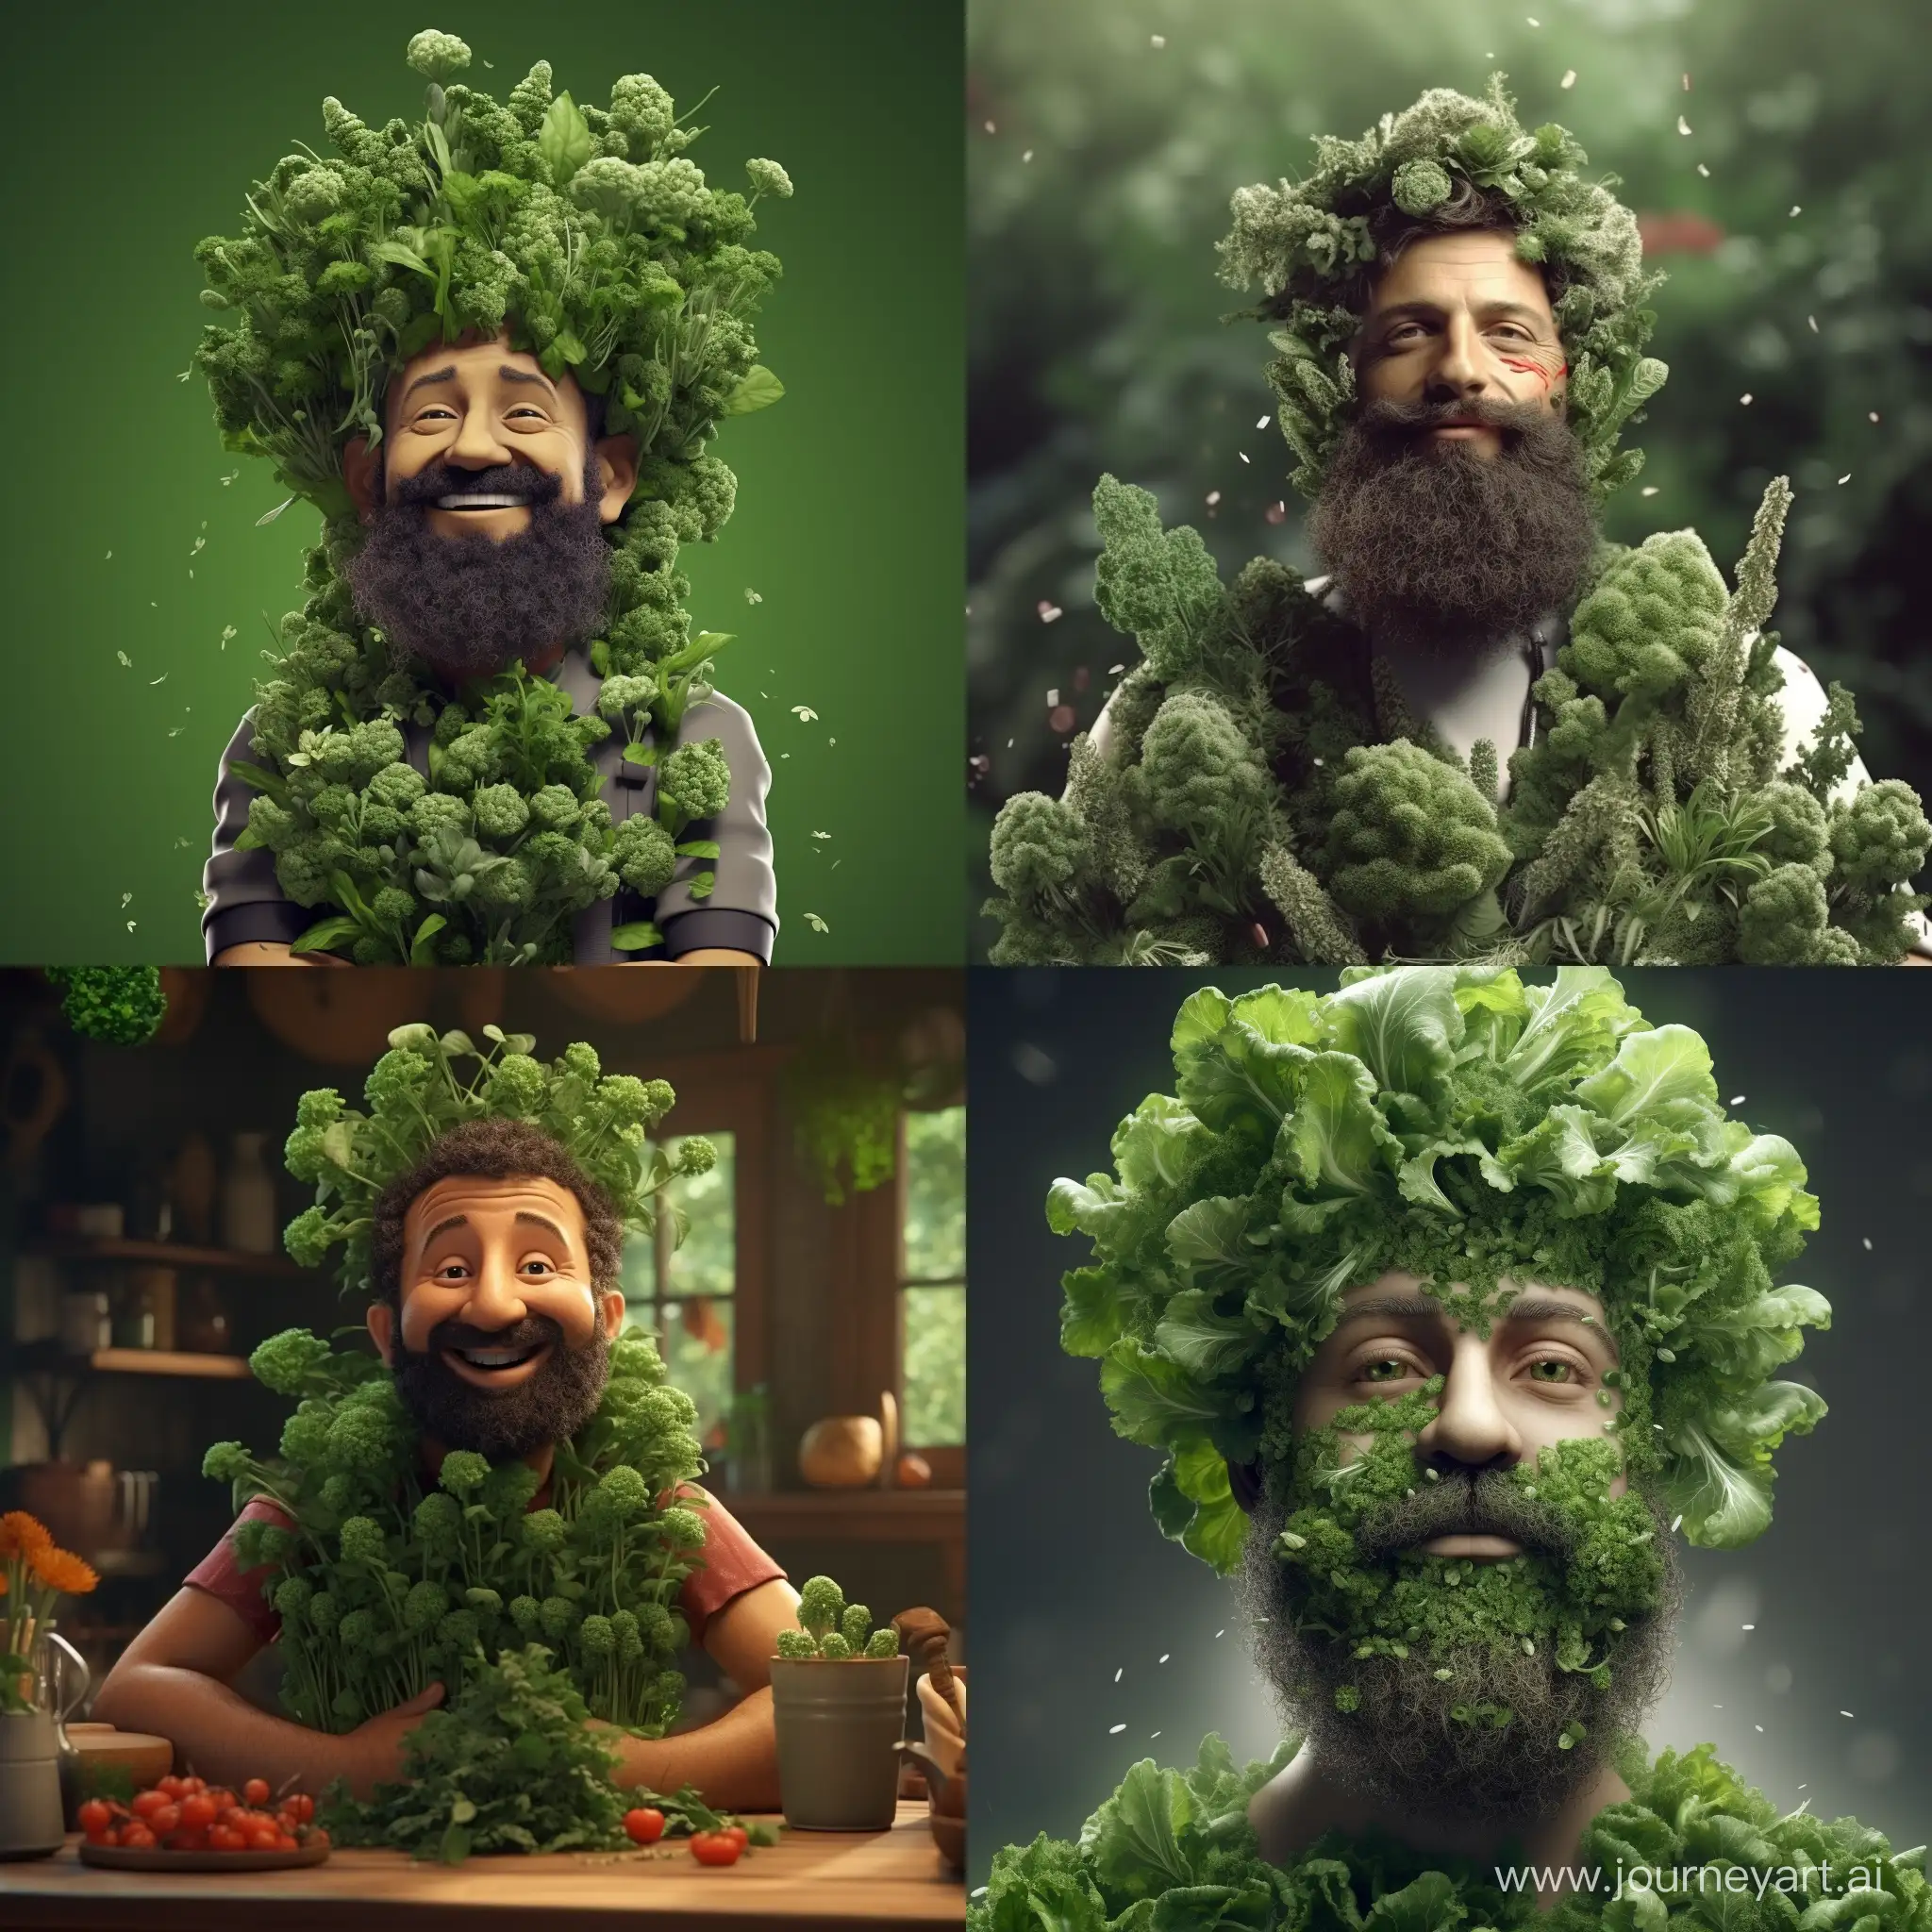 Whimsical-3D-Animation-Bearded-Man-Crafted-from-Fresh-Parsley